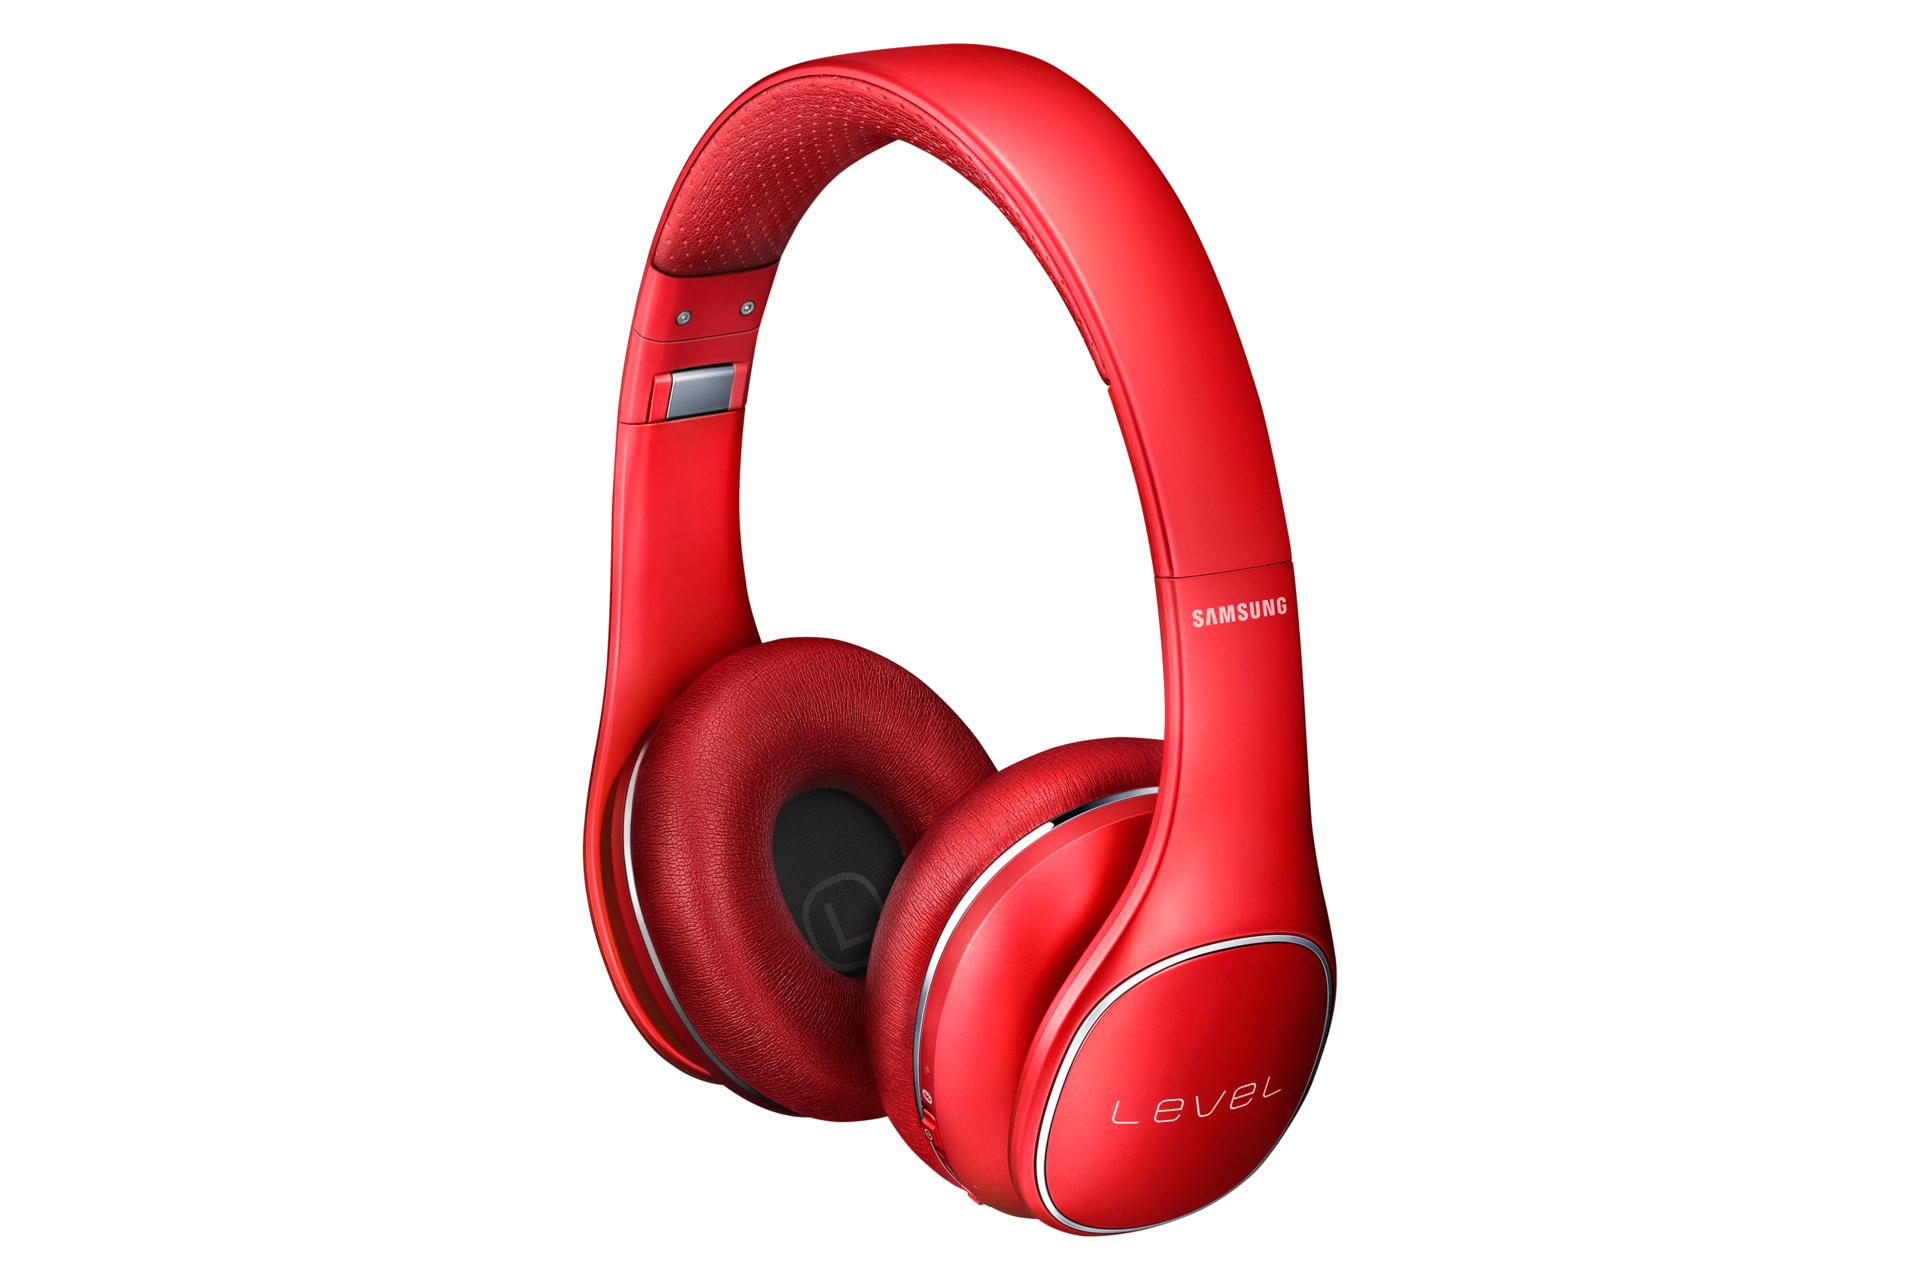 br-level-on-wireless-headset-pn900-eo-pn900brpgbr-000079113-r-perspective-red